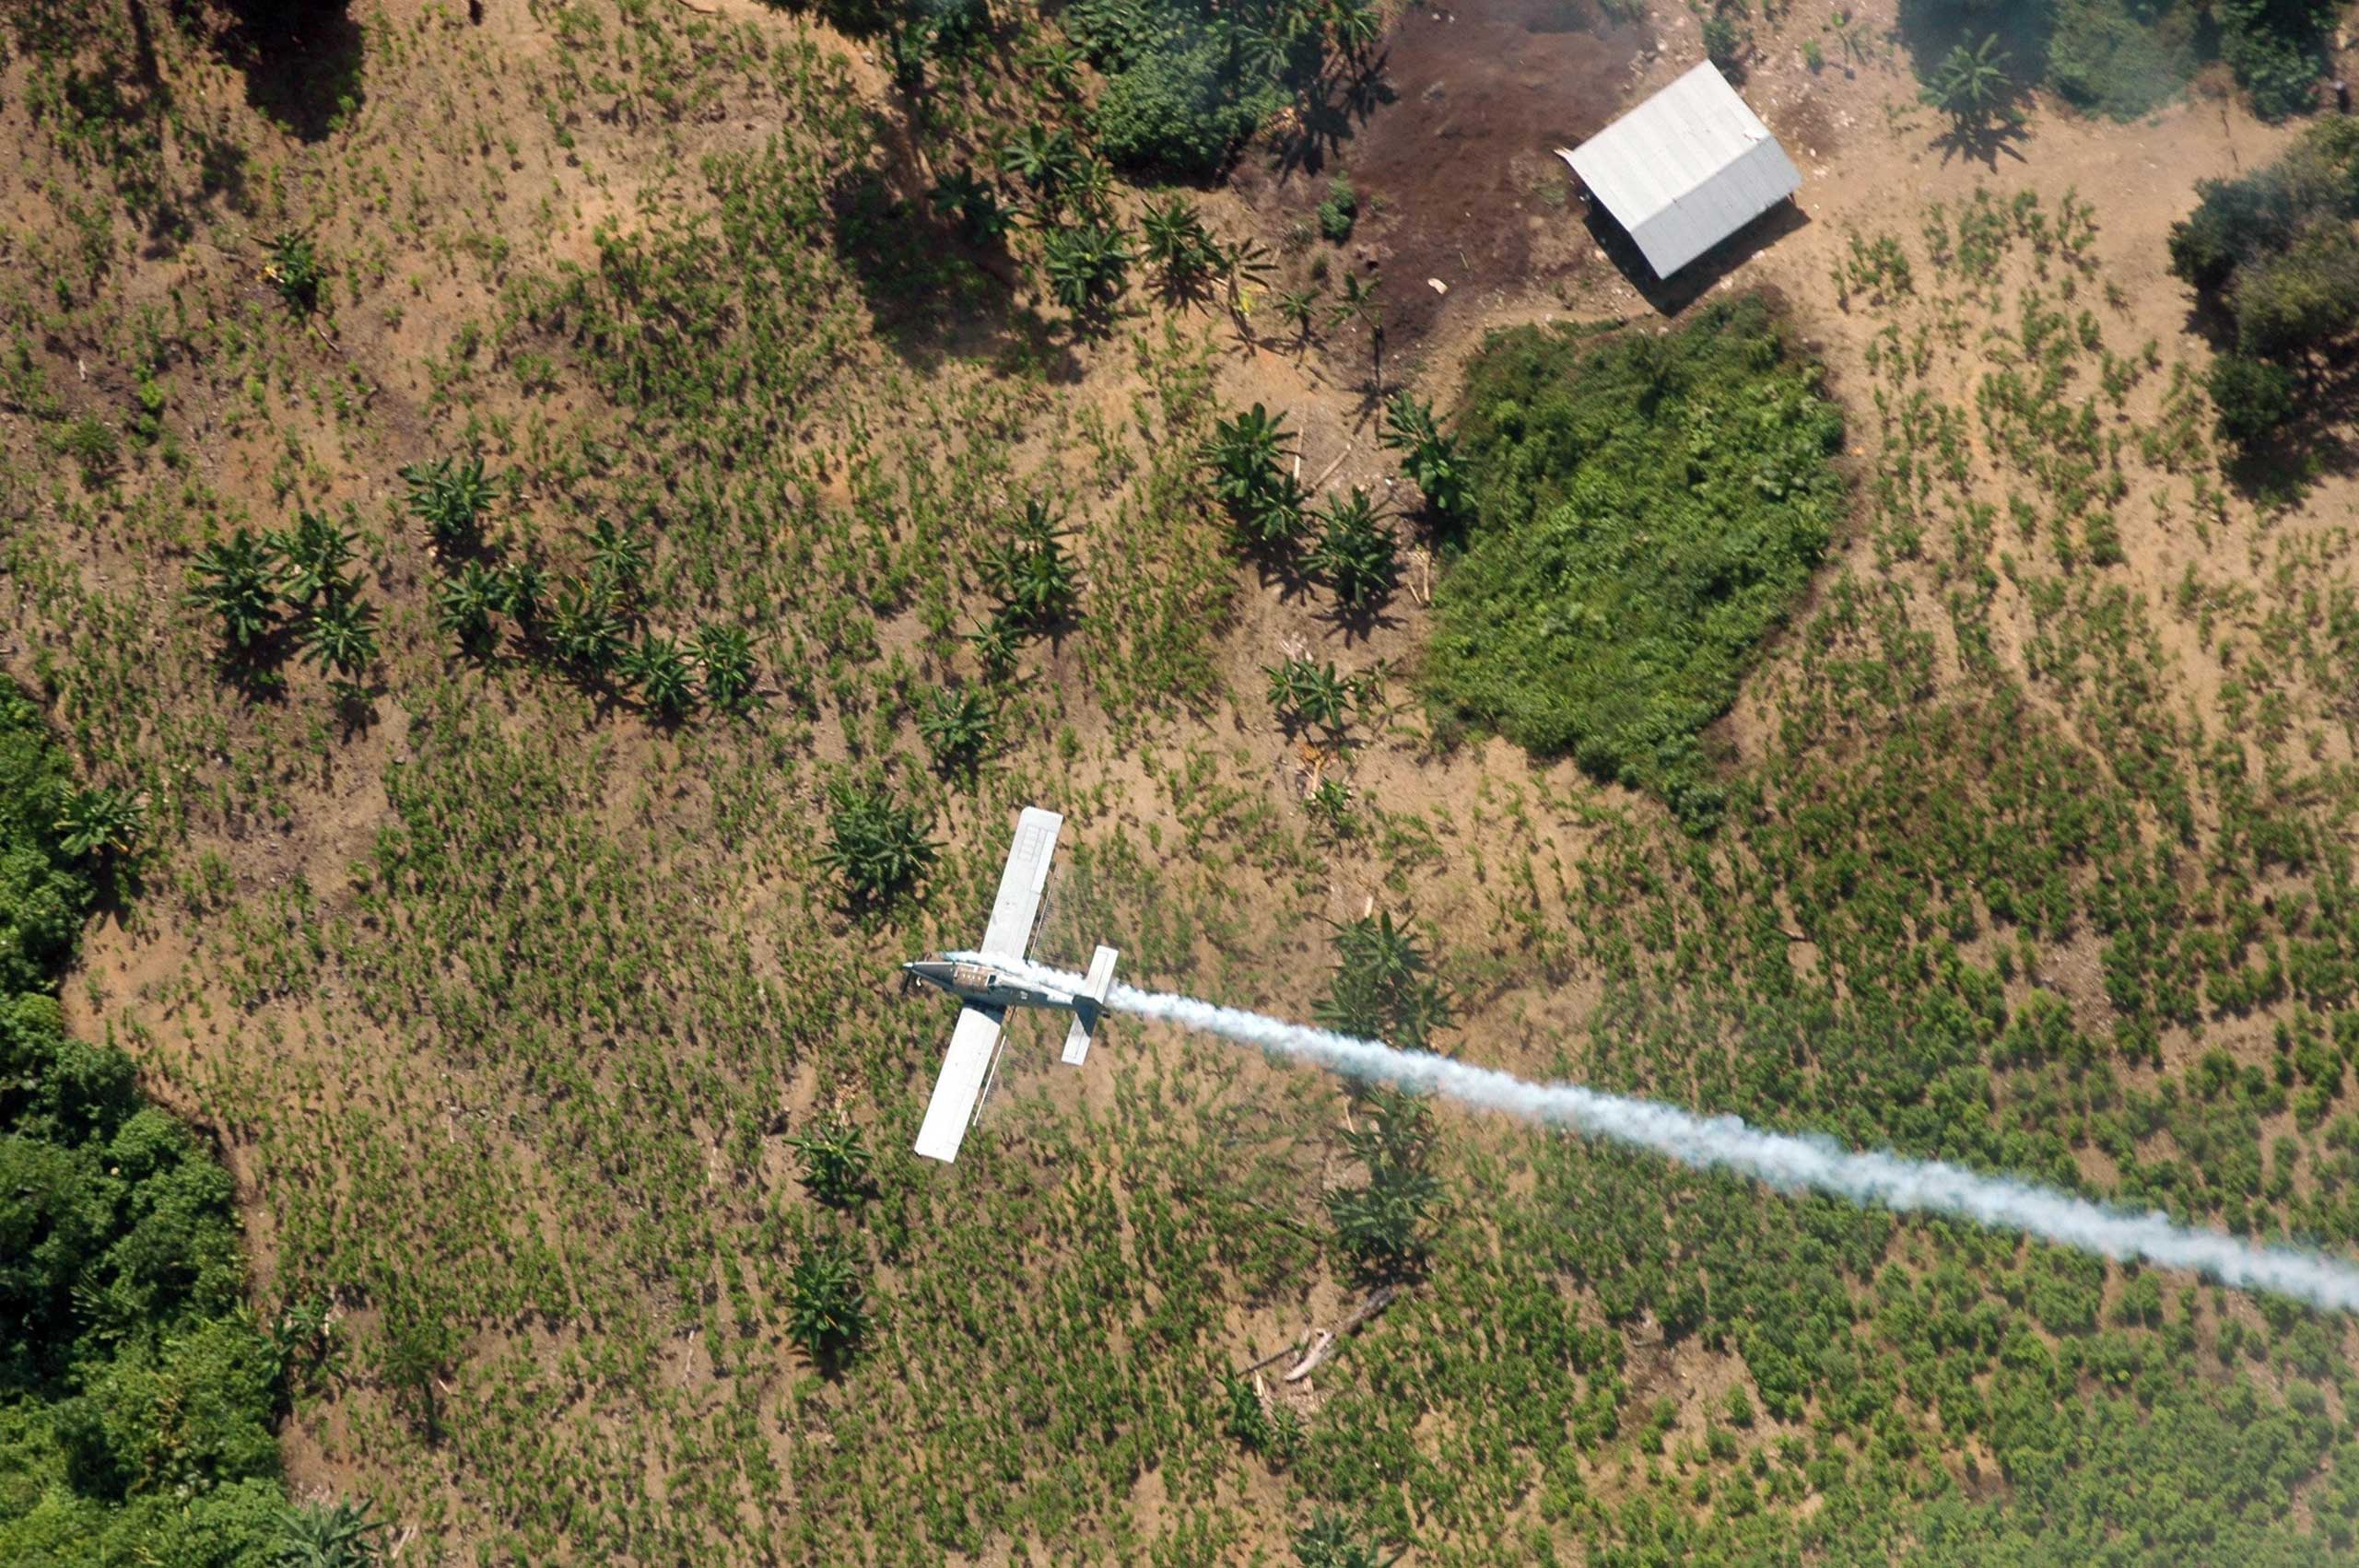 A police plane sprays herbicides over coca fields in El Tarra, in the Catatumbo river area of Colombia on June 4, 2008.